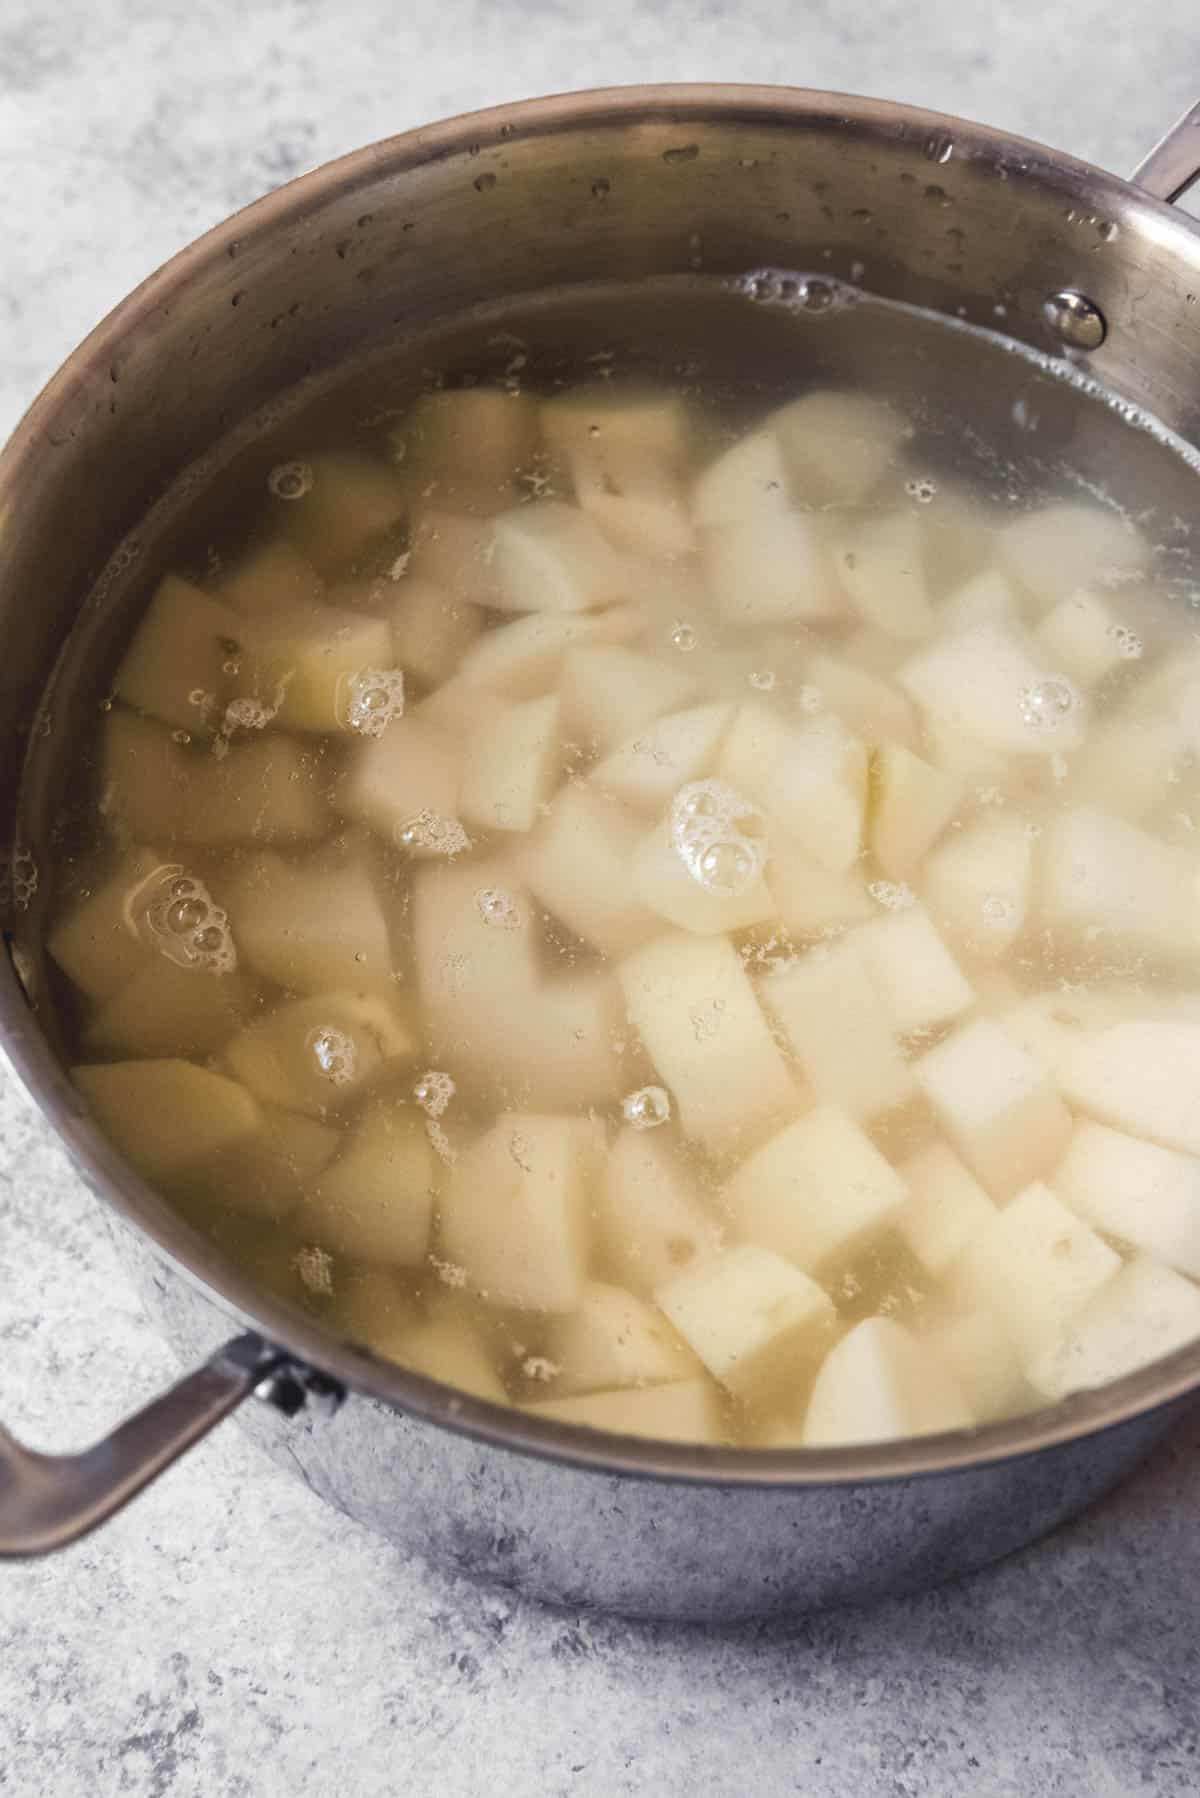 An image of Russet potatoes chopped and placed n a pot of cold, salted water to cook for a mashed potatoes recipe.